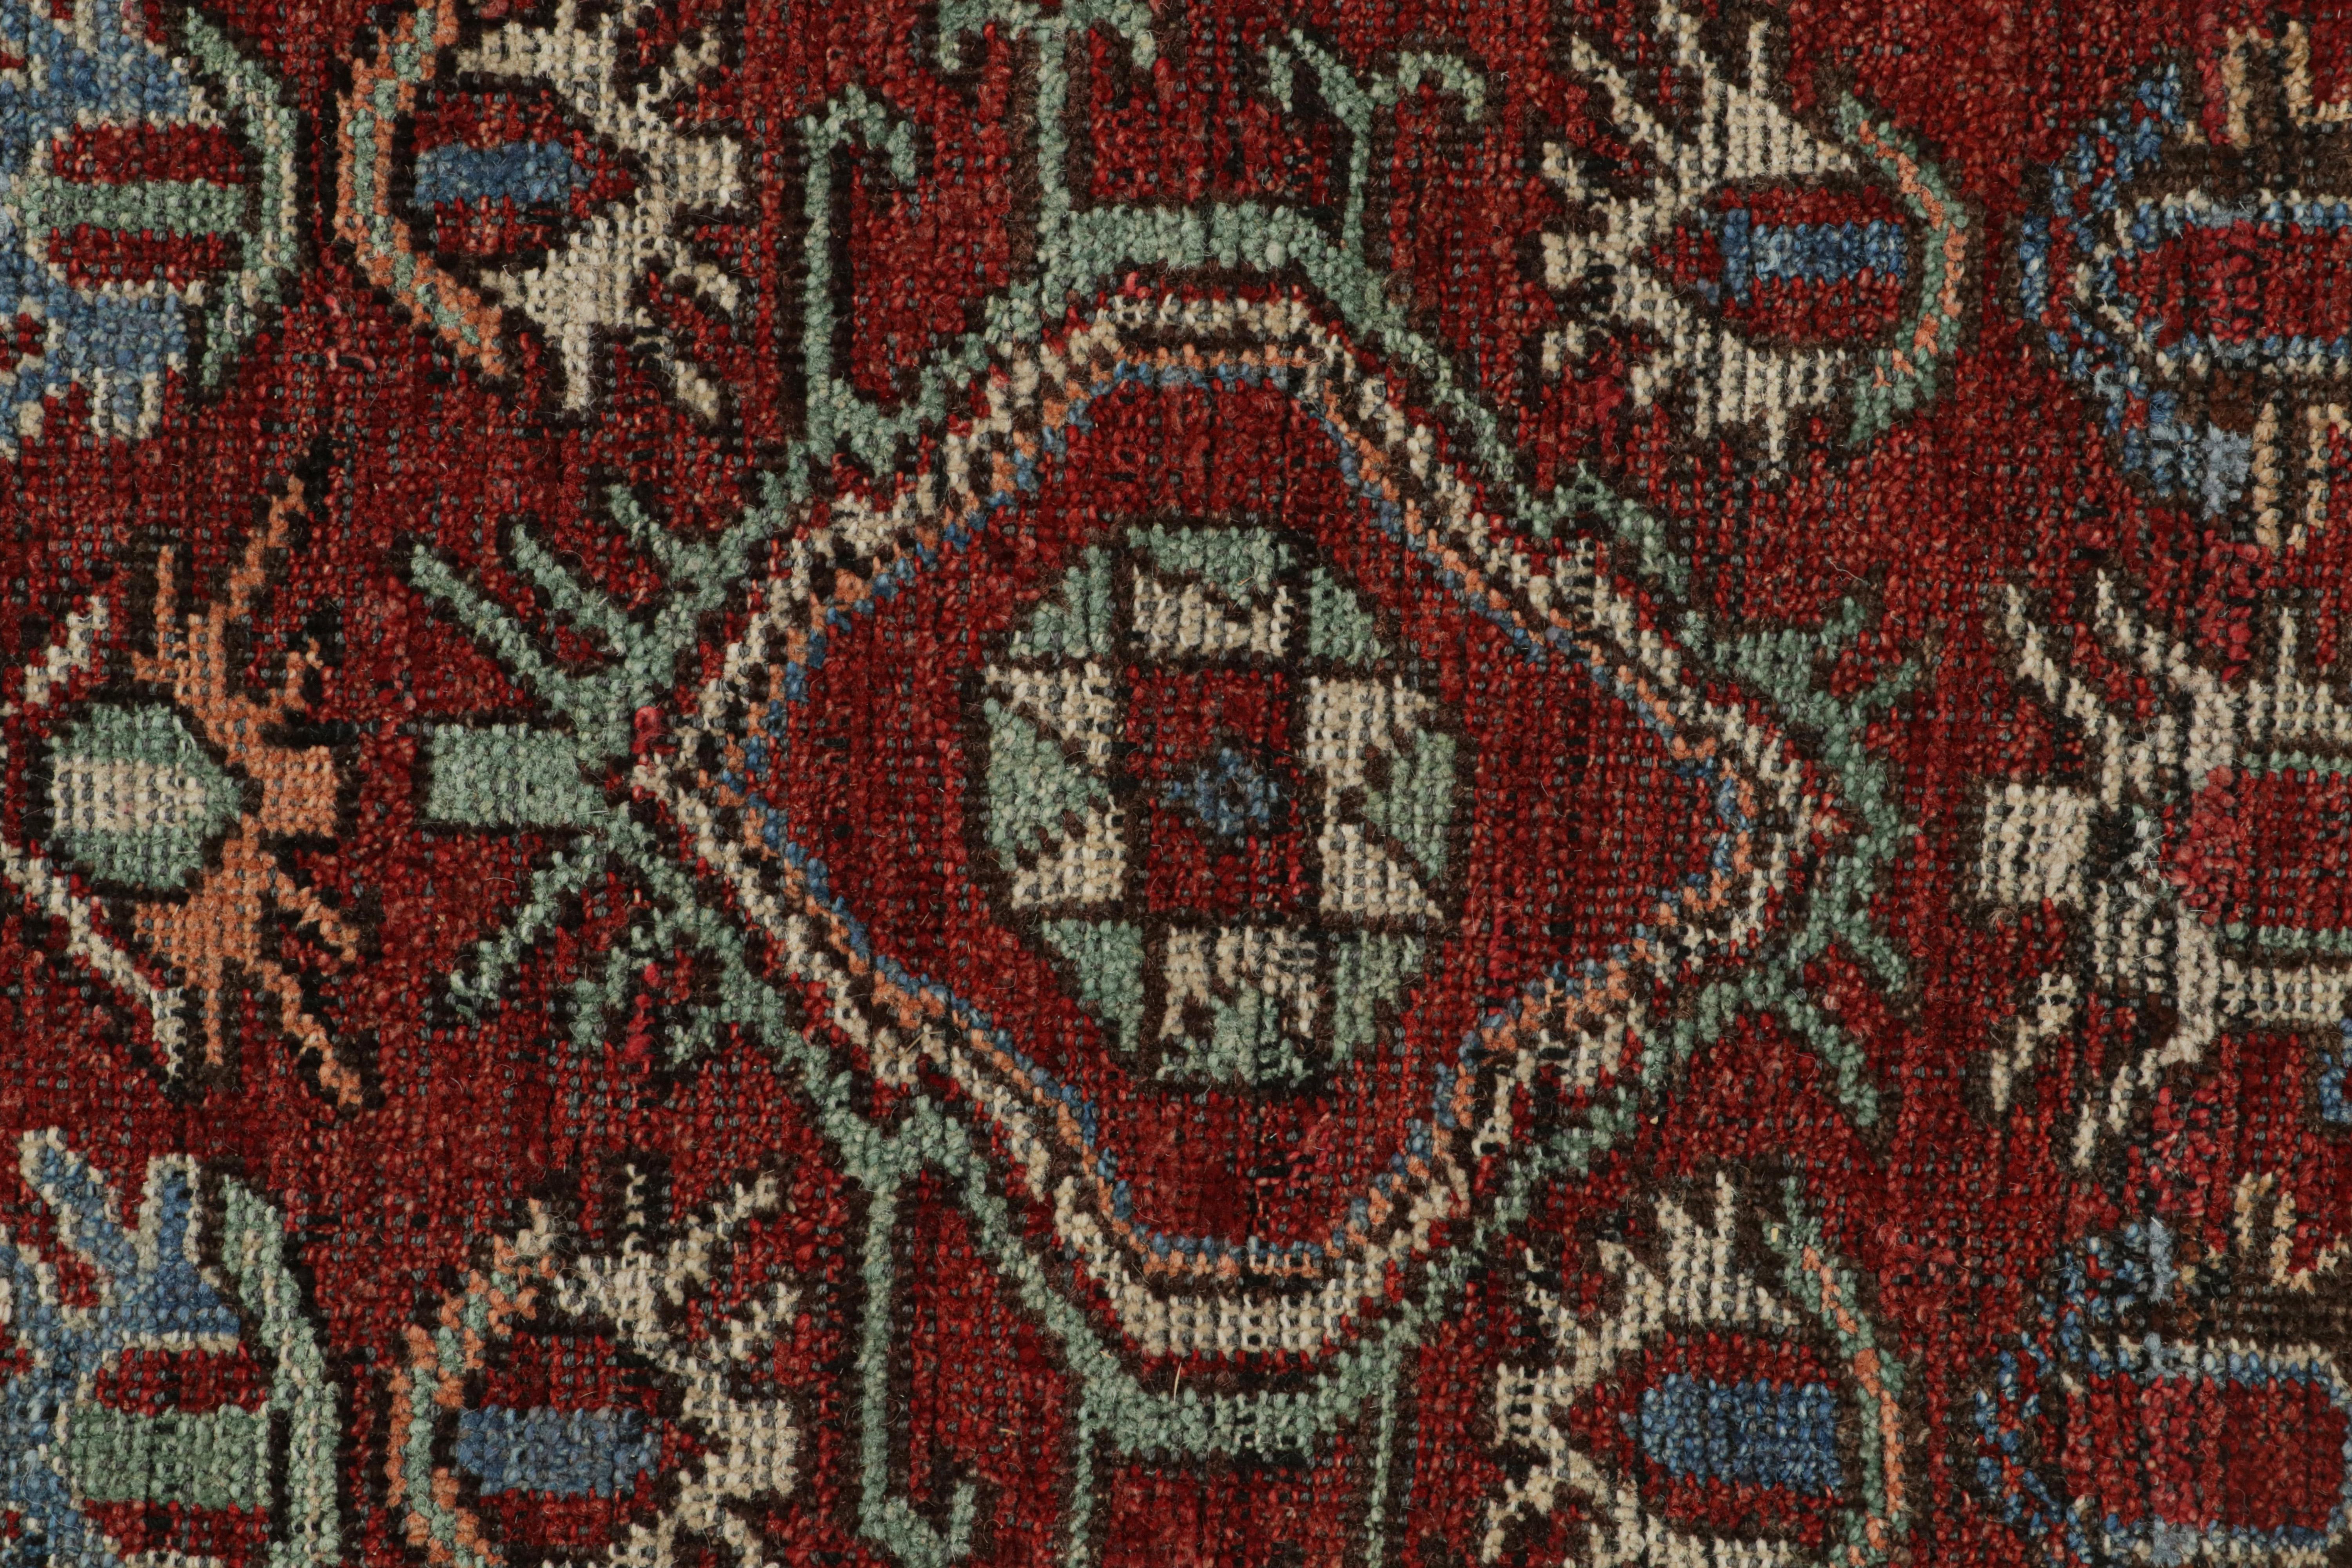 Contemporary Rug & Kilim’s Antique Tribal Style Rug in Red, Blue, Green & Black Patterns For Sale